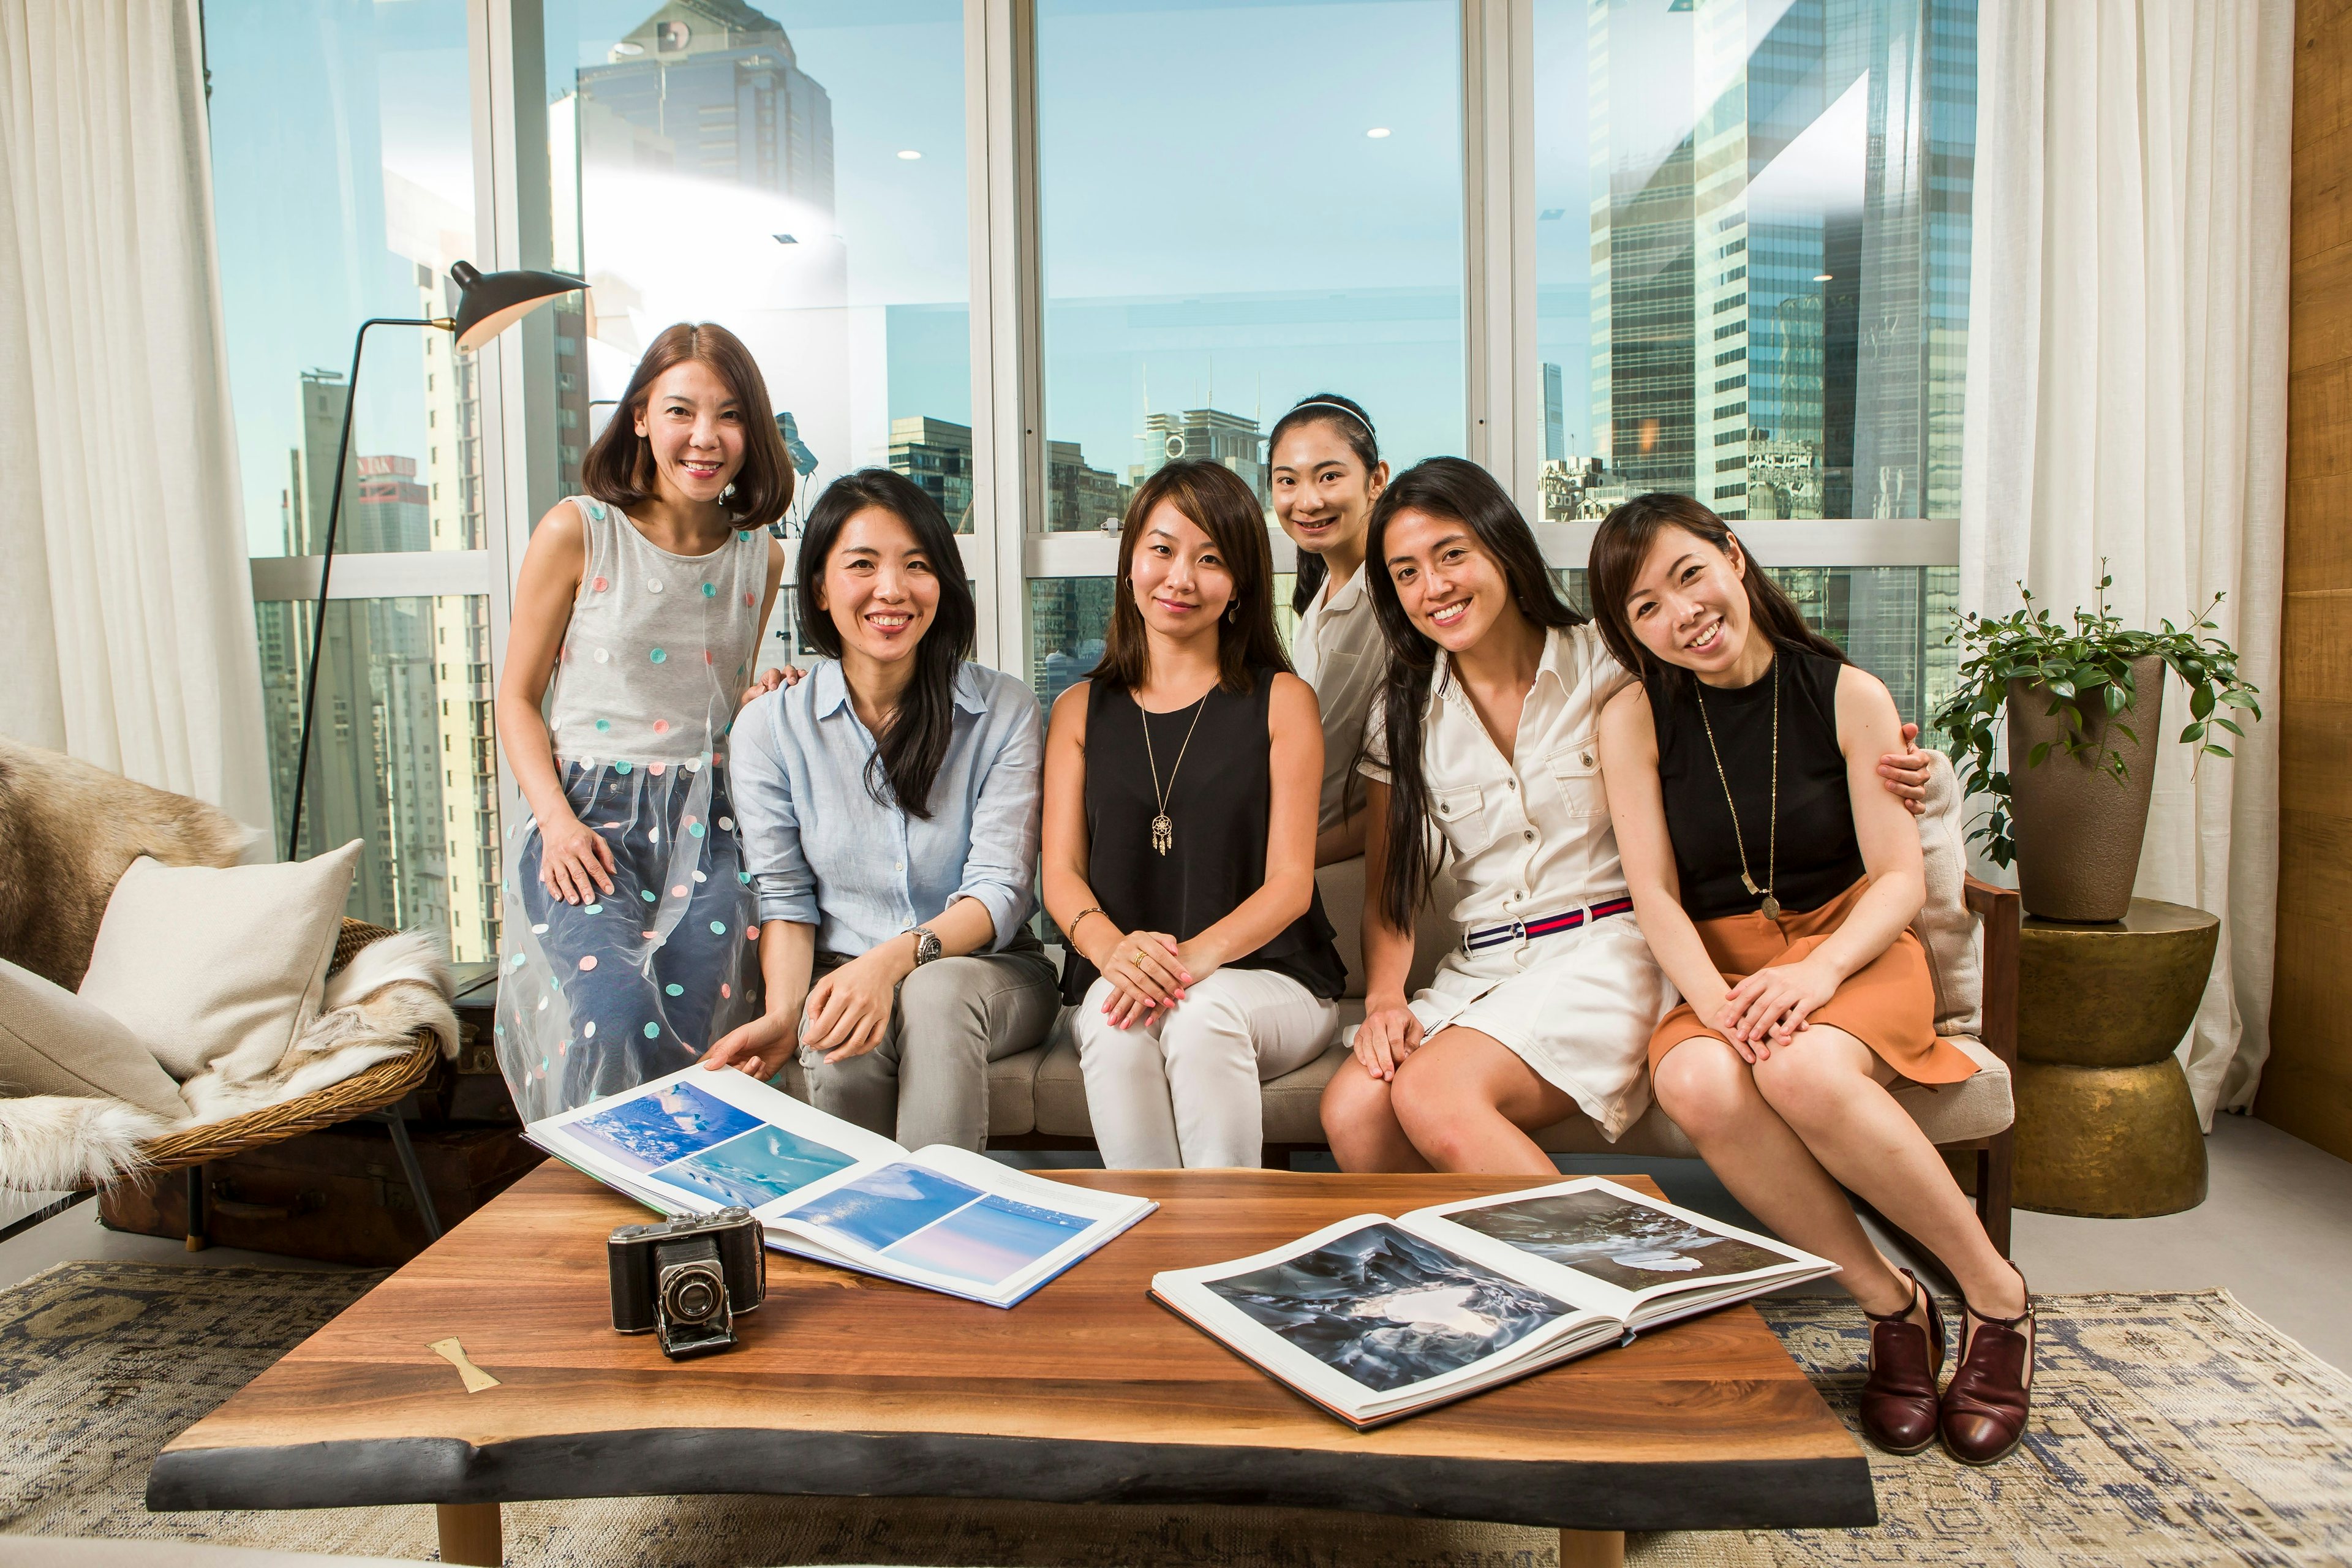 Jacada Travel's Hong Kong based team members, some of whom are former travel writers, bring in depth experience to their Chinese clients. (Courtesy of Jacada Travel)